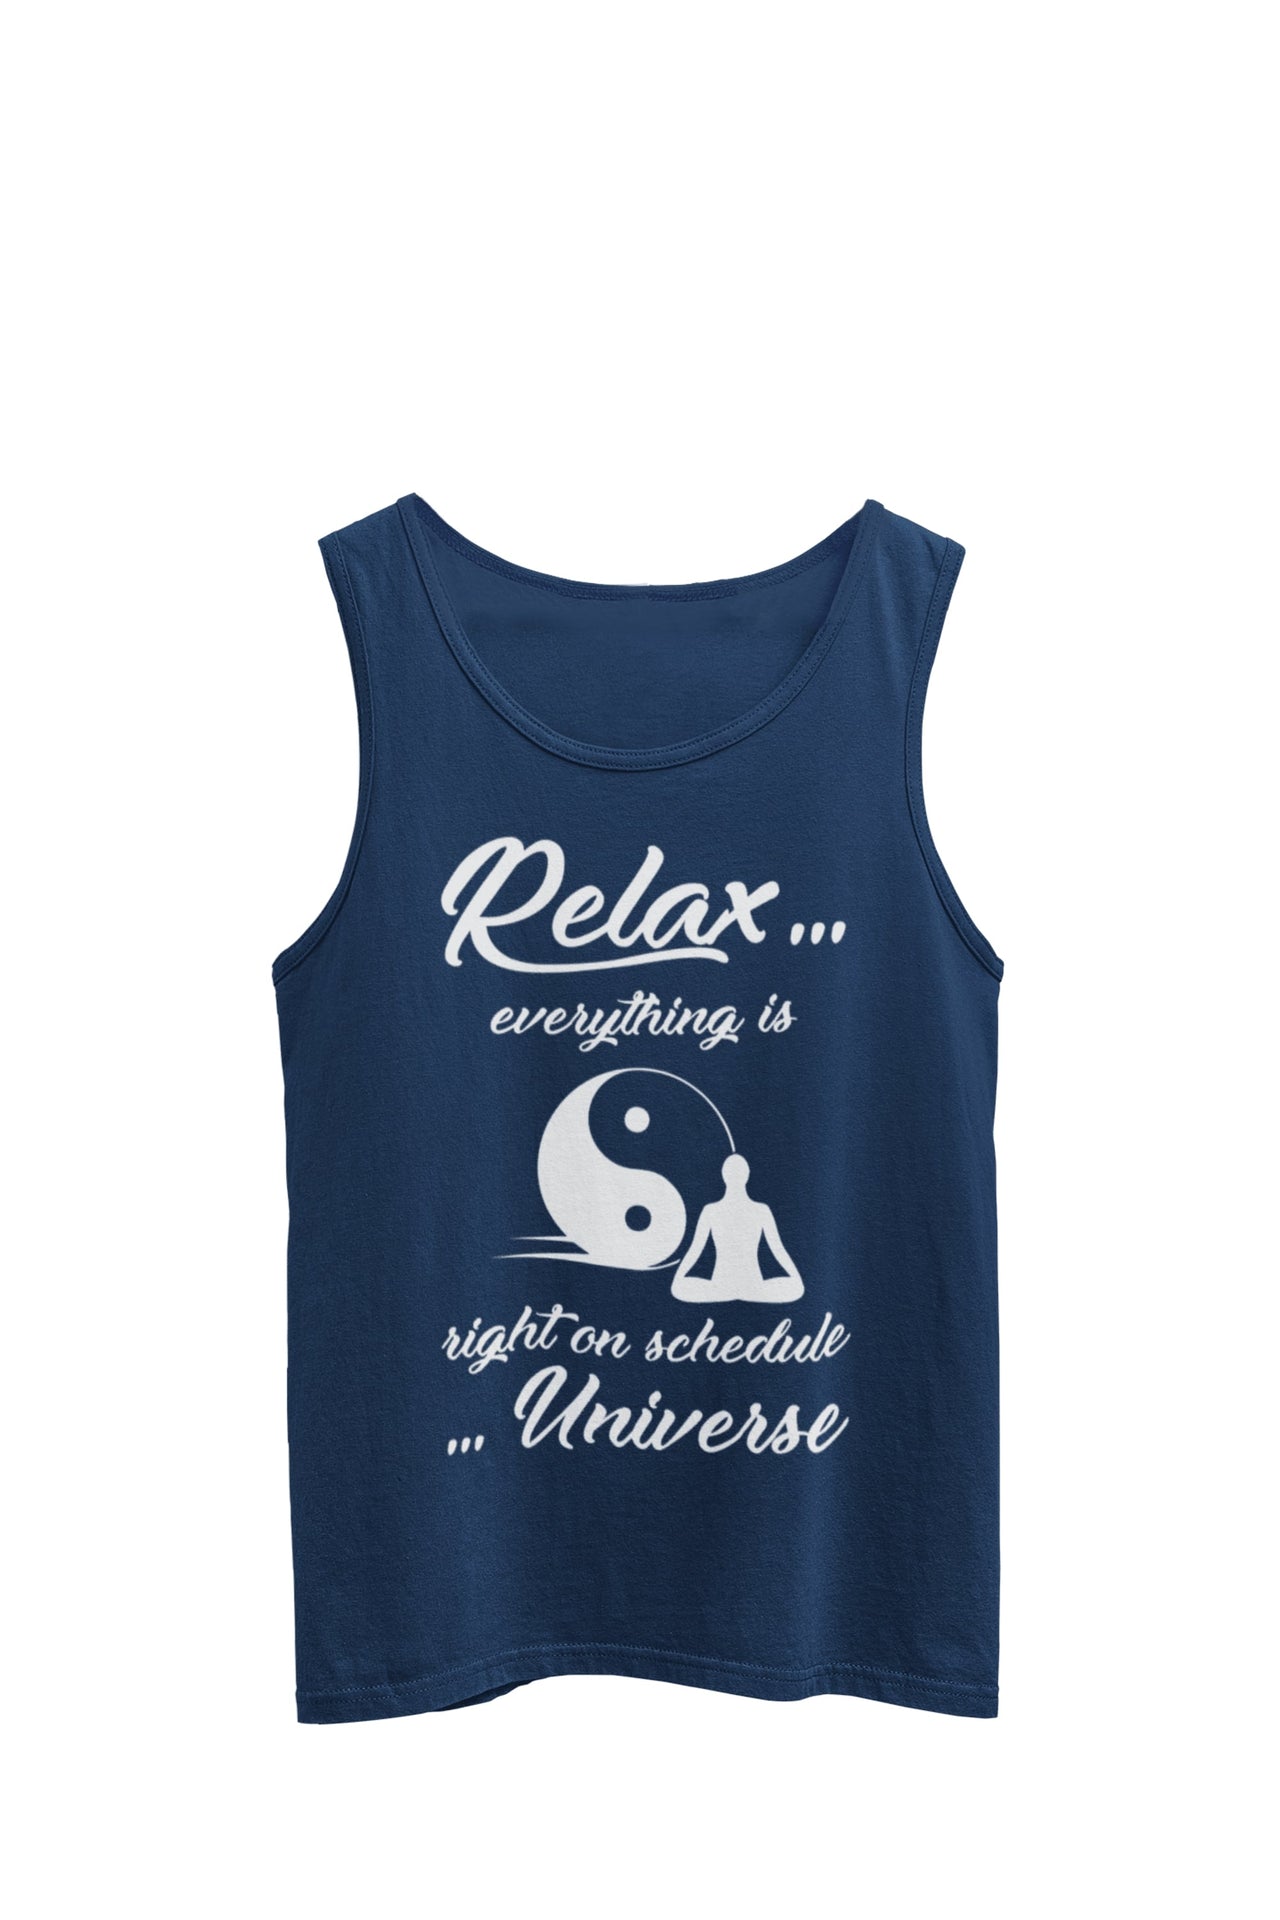 Navy tank top featuring a person doing yoga, with the text 'Relax, everything is right on schedule' and 'universe' written on the t-shirt. Made by WooHoo Apparel.